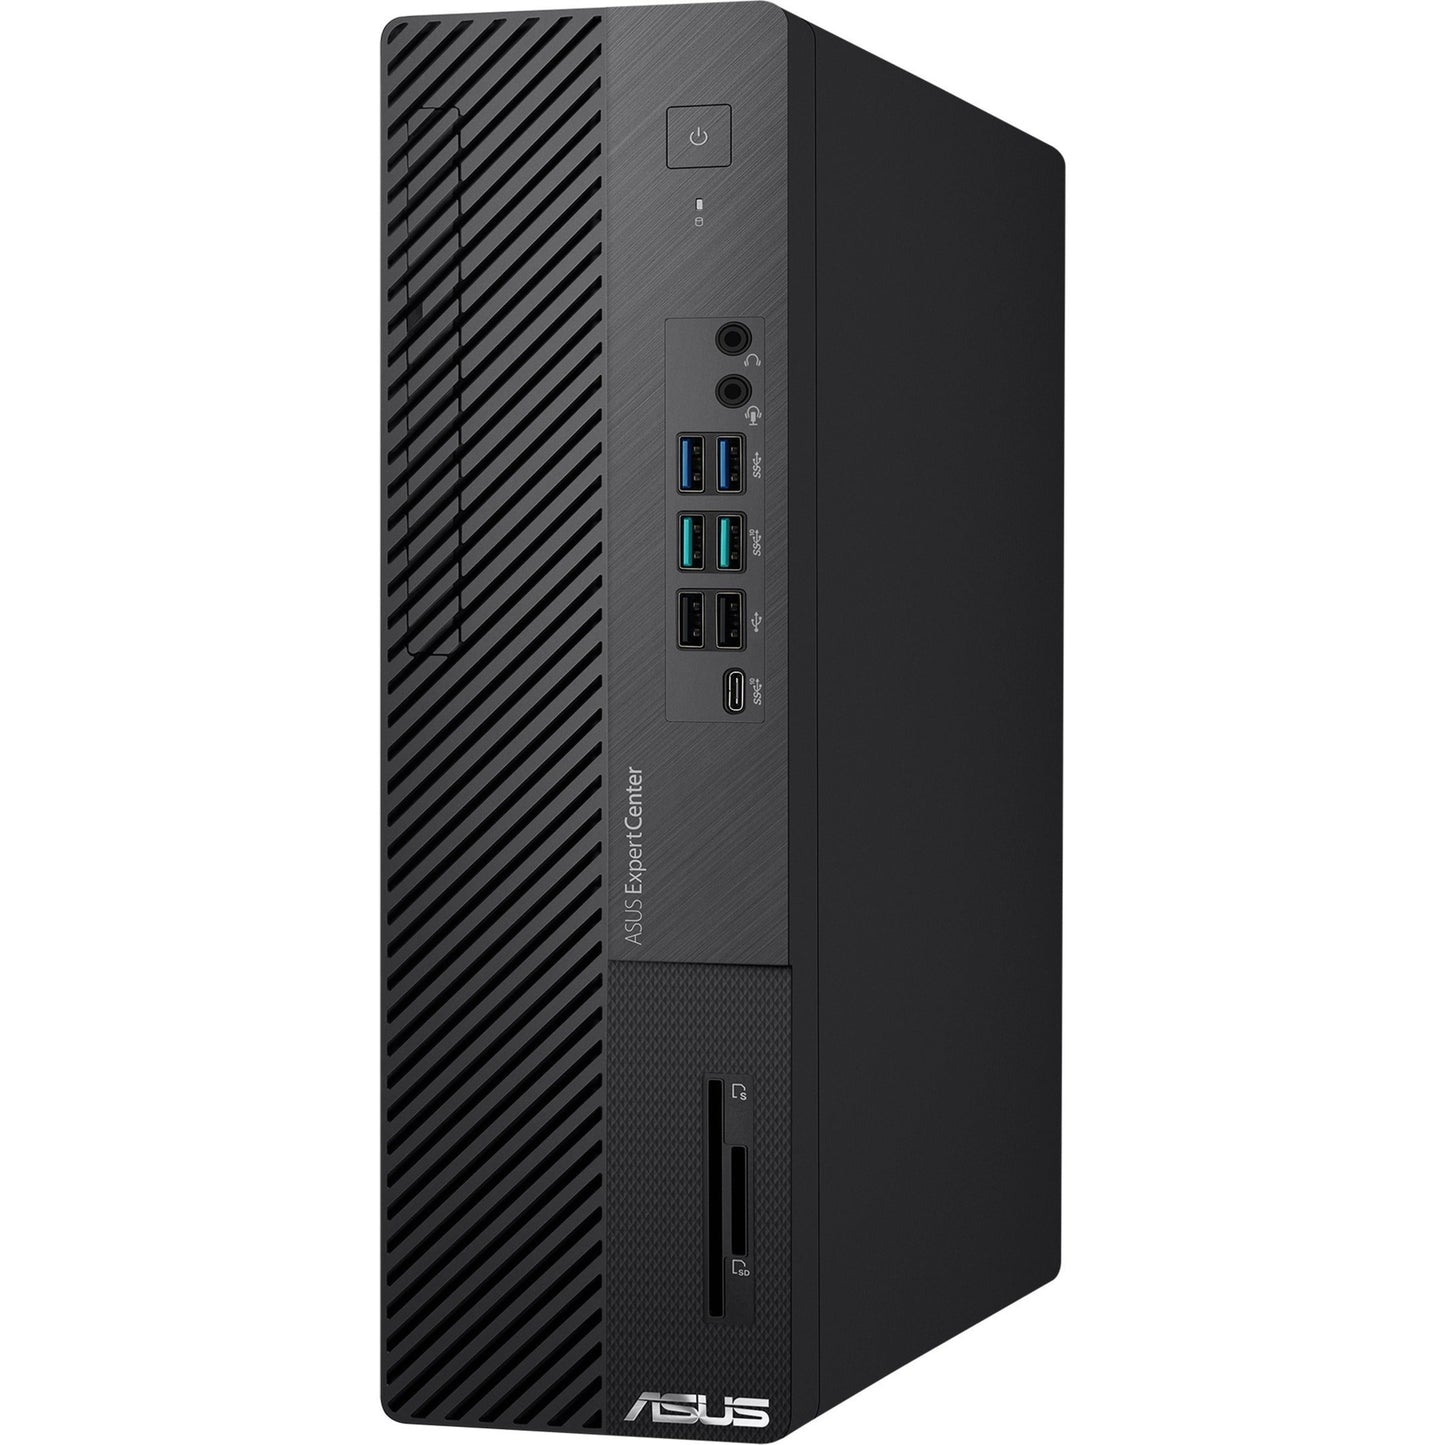 Asus ExpertCenter D700SD-XH704 Desktop Computer - Intel Core i7 12th Gen i7-12700 Dodeca-core (12 Core) 2.10 GHz - 16 GB RAM DDR4 SDRAM - 512 GB M.2 PCI Express NVMe 3.0 SSD - Small Form Factor - Black